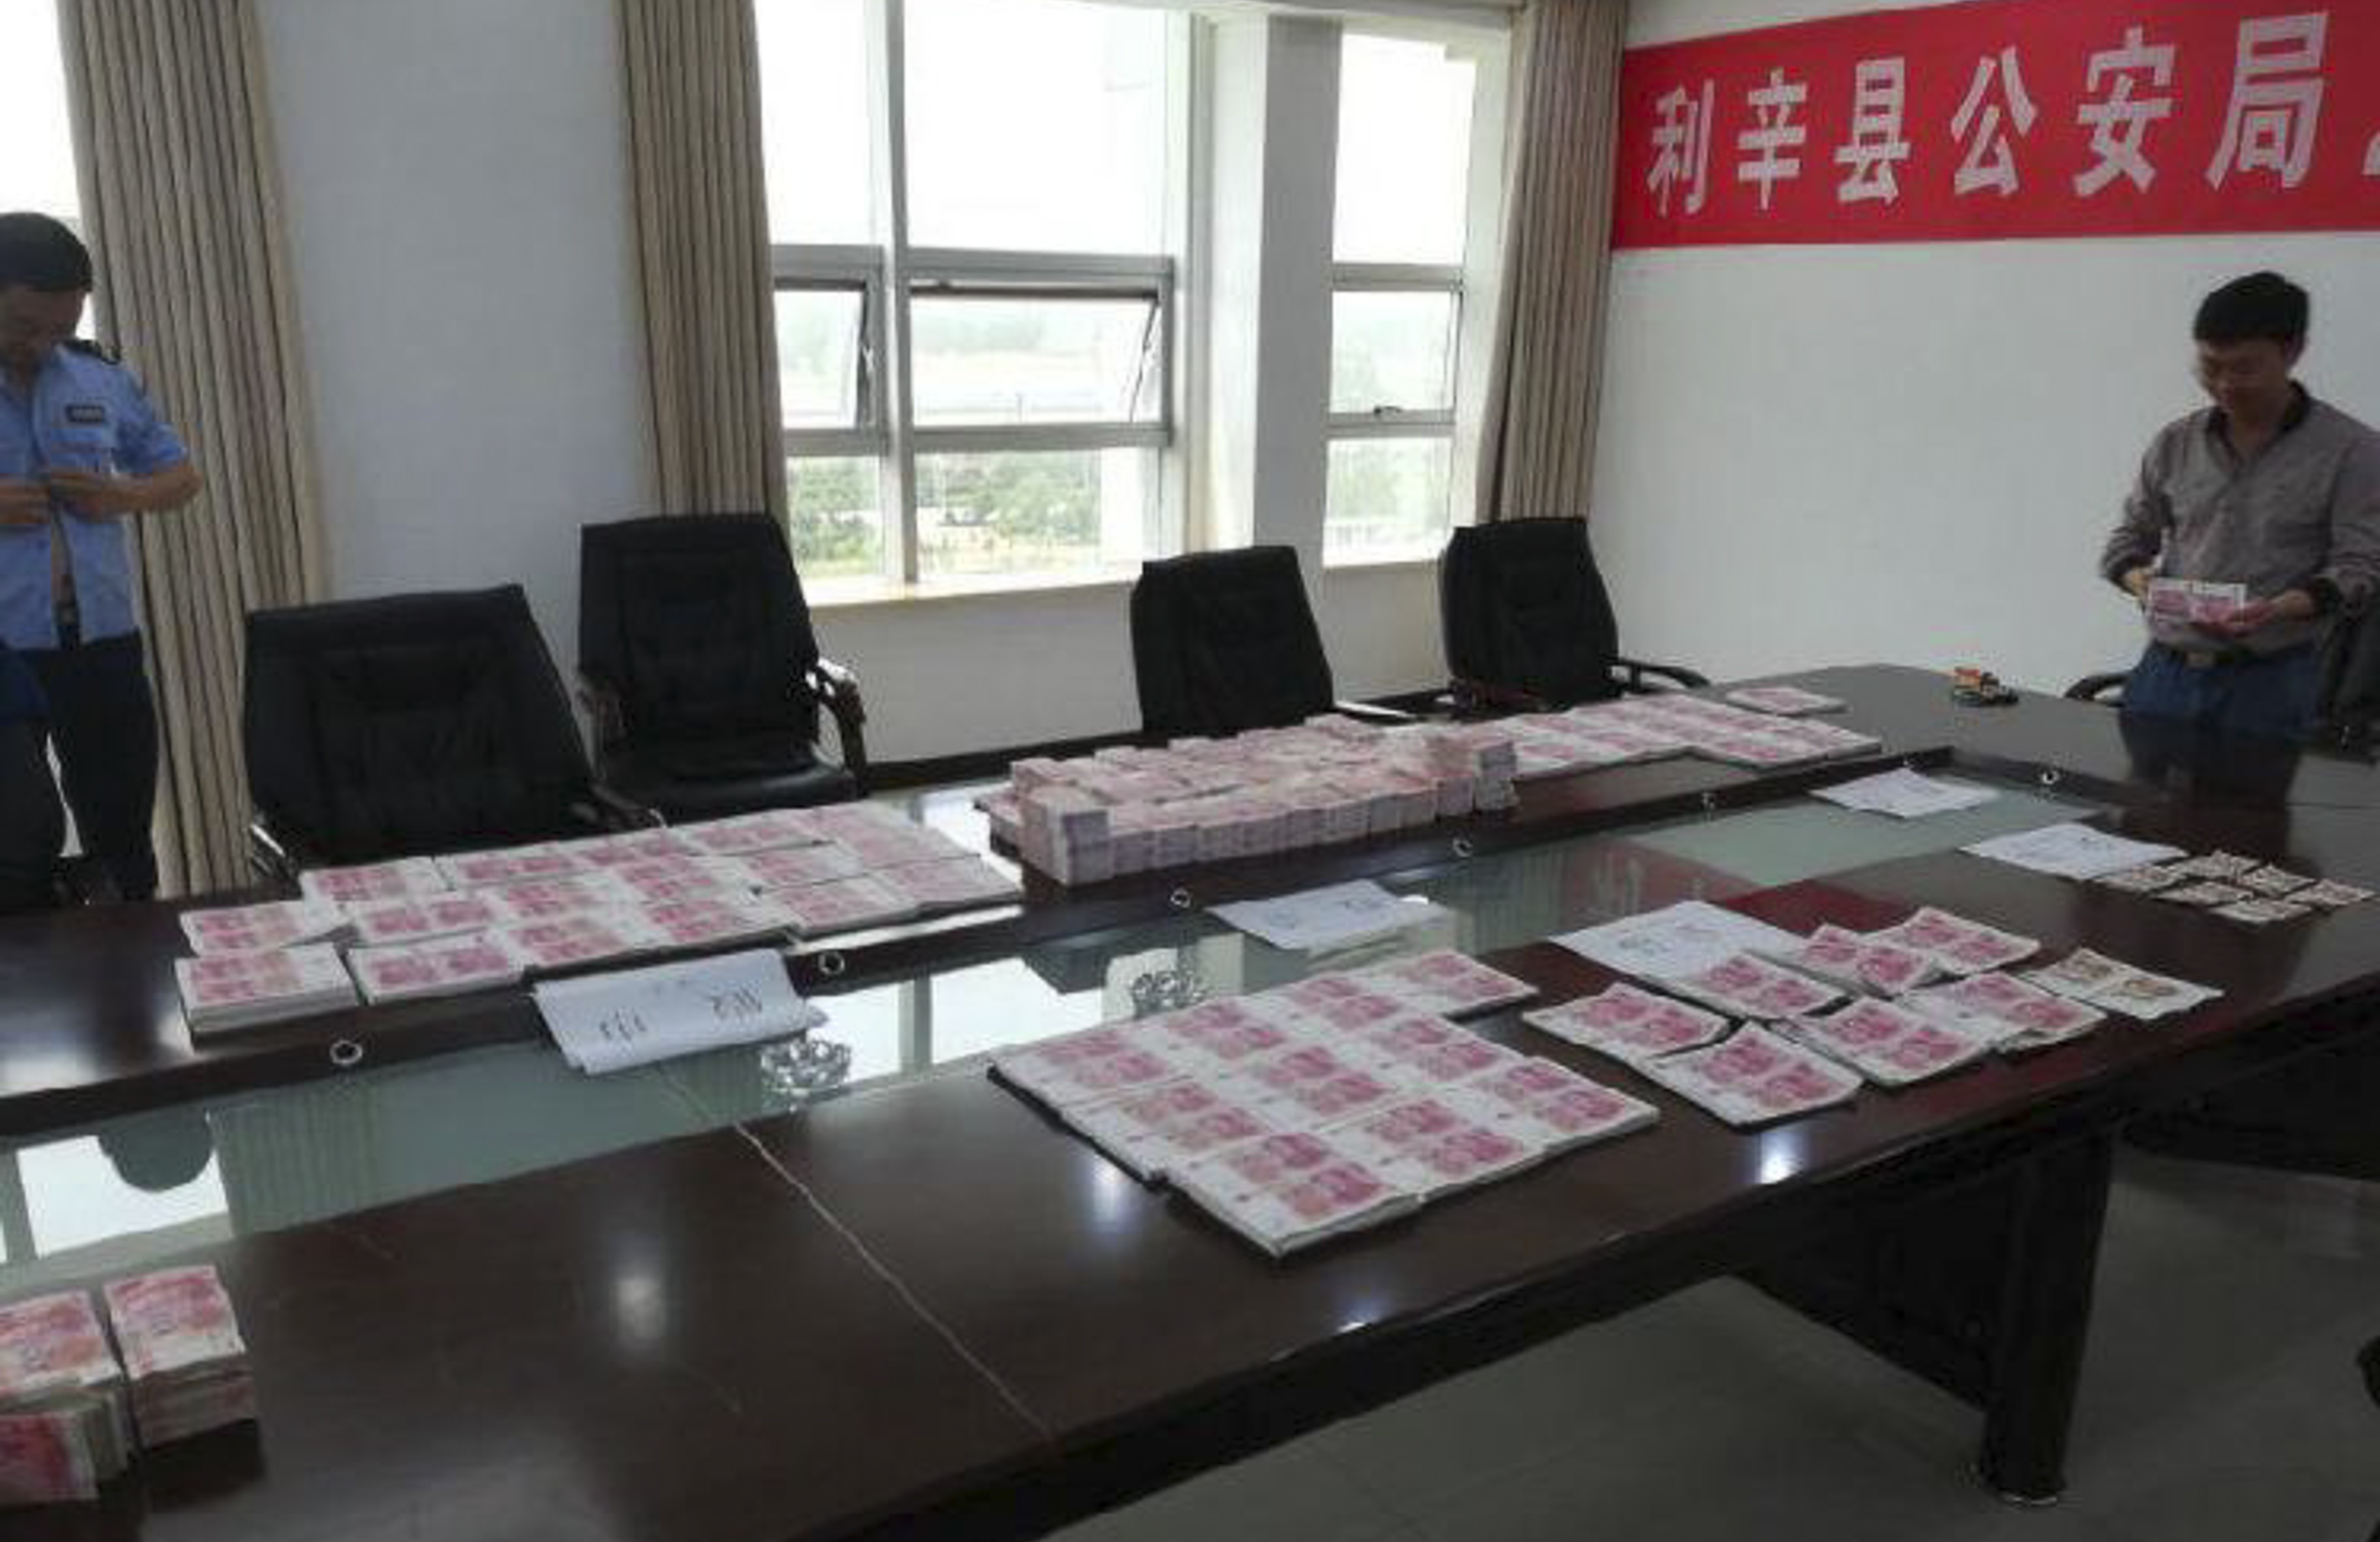 Police found US$365 million in counterfeit banknotes at the home in Lixin, Anhui province. Photo: cqcb.com